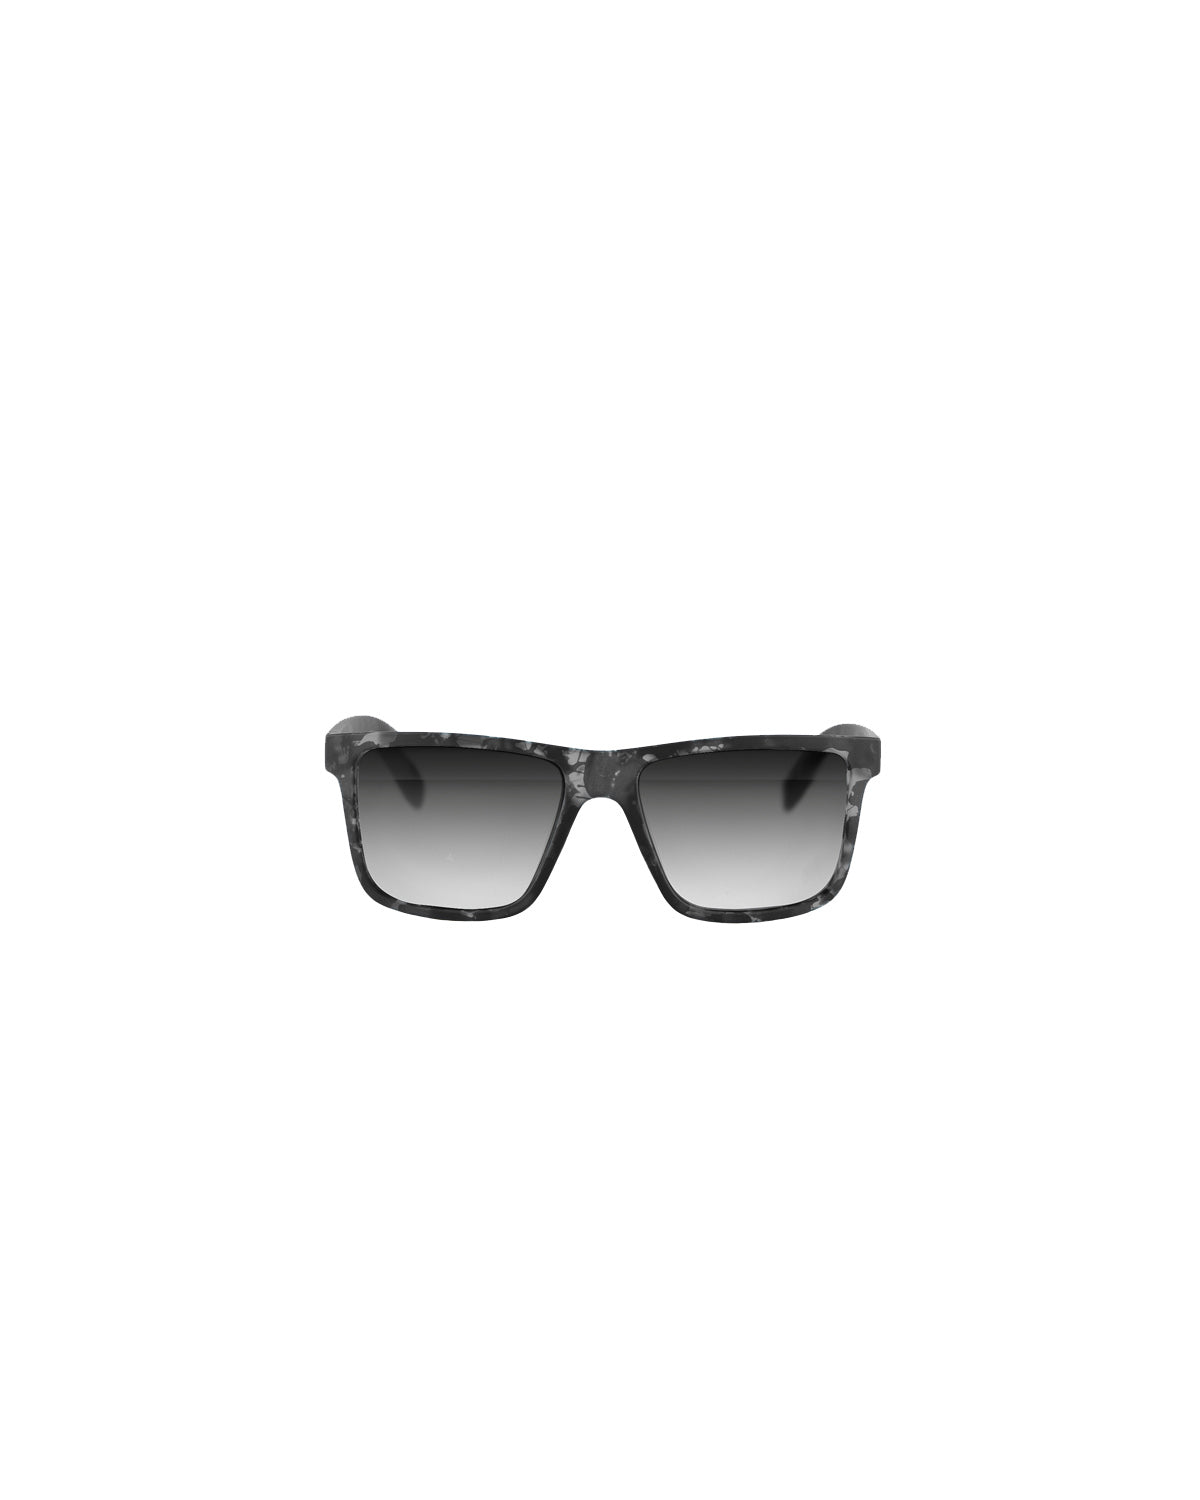 Marbled Charcoal Effect Sunglasses With Shaded Lens